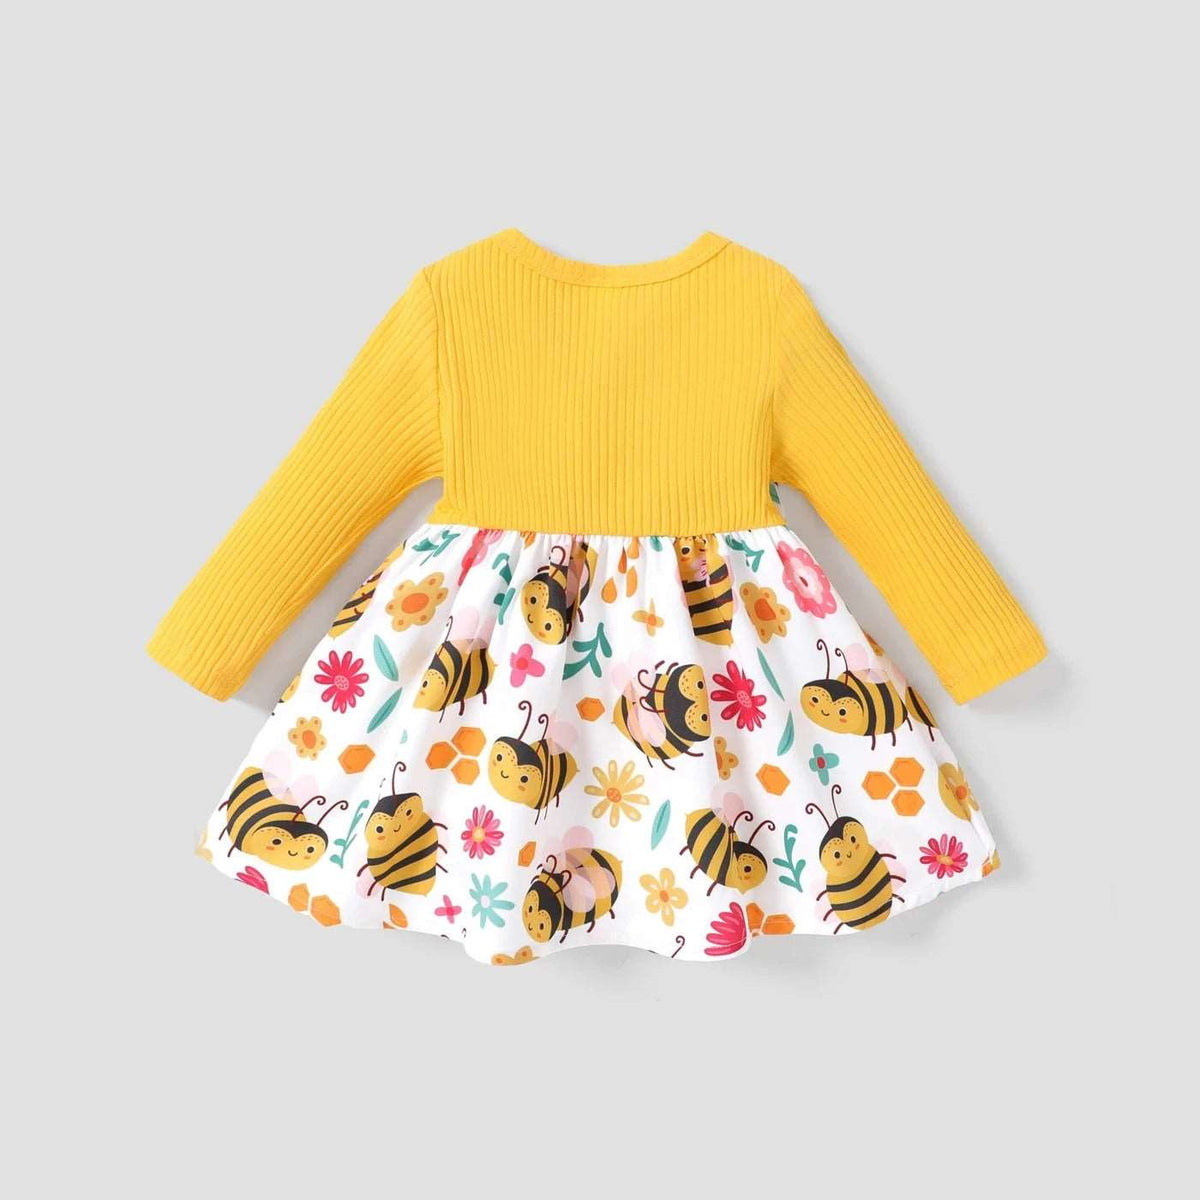 PatPat Baby Girl Honeybee Animal pattern 3D Bowknot  Dress - For all baby